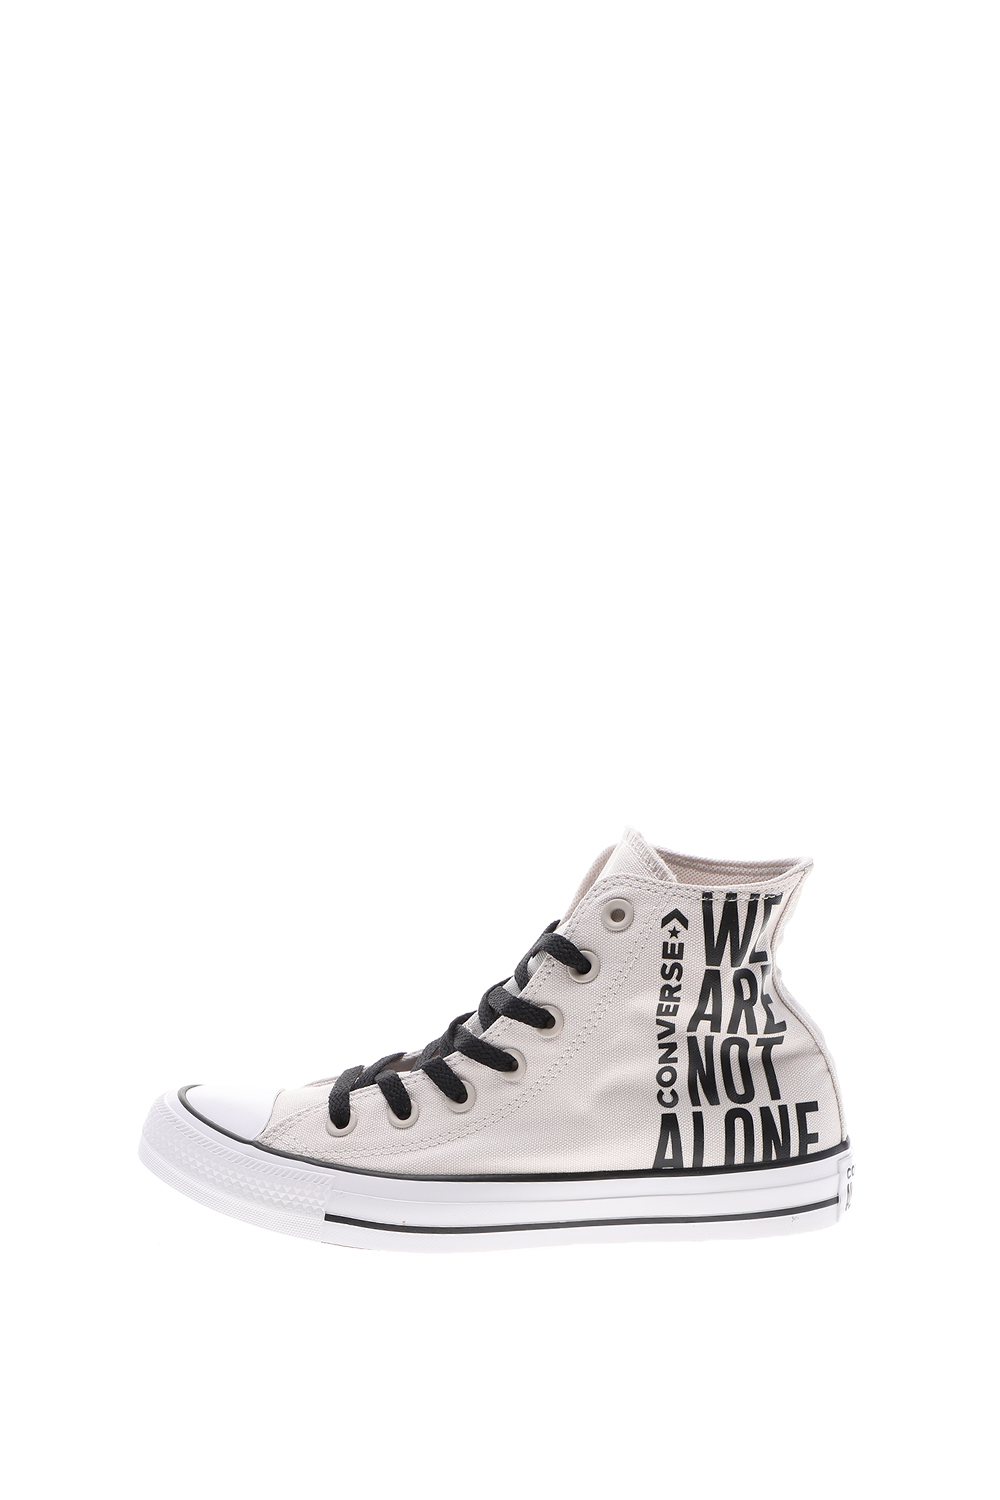 CONVERSE – Unisex ψηλά sneakers CONVERSE CHUCK TAYLOR ALL STAR γκρι καφέ